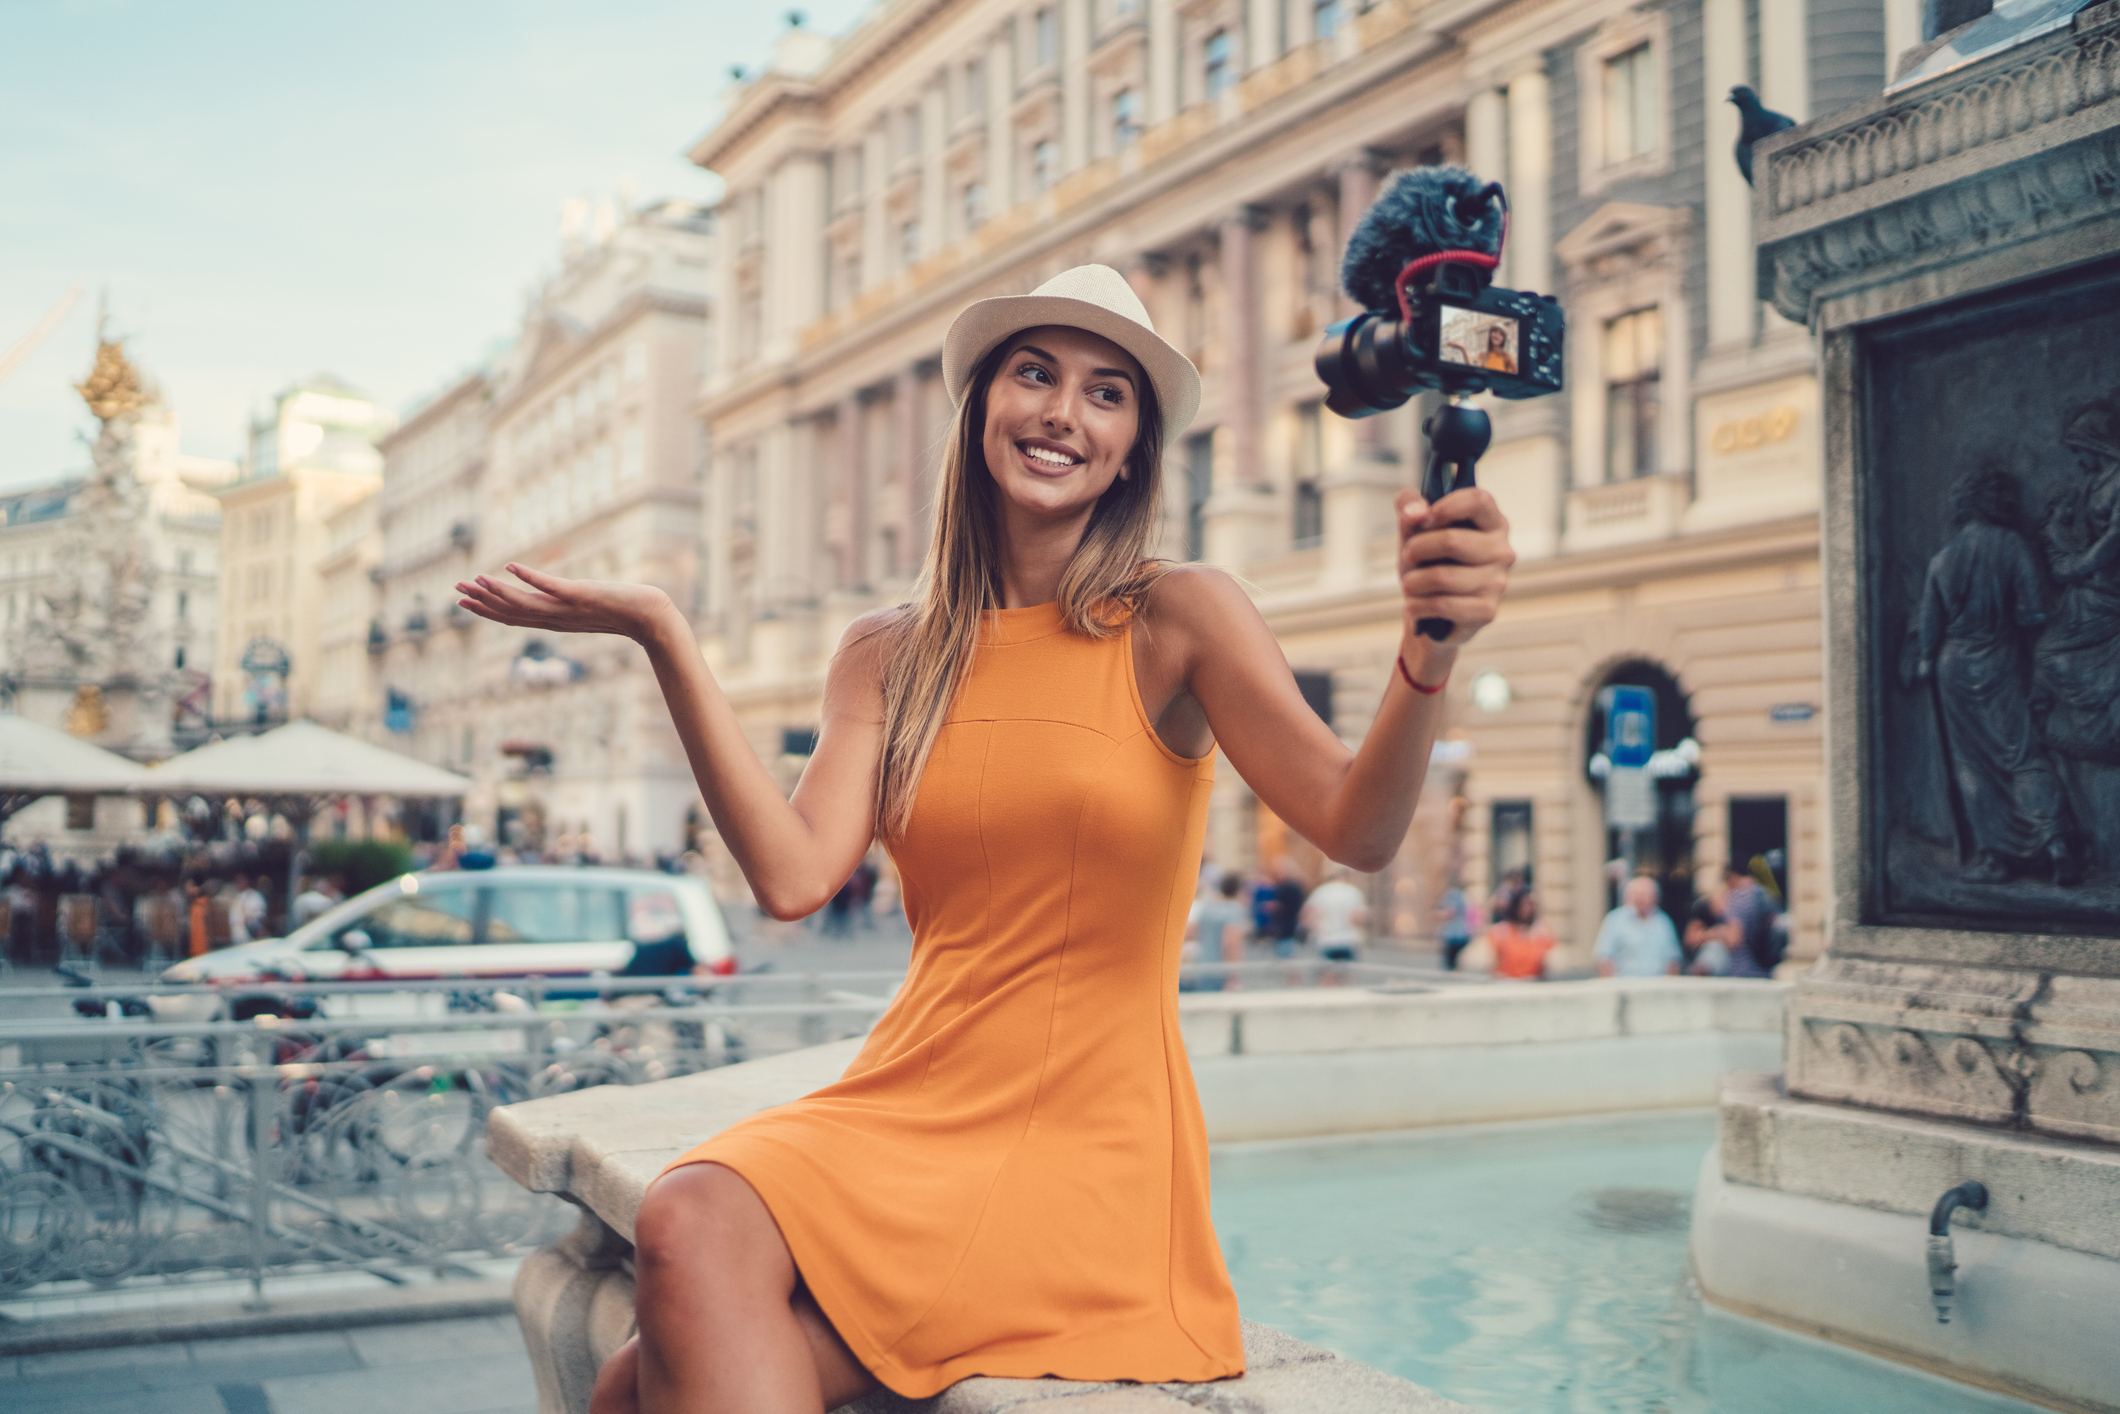 A woman in a sleeveless dress and hat smiles while holding a camera on a handheld tripod. She is seated on the edge of a fountain in an urban setting